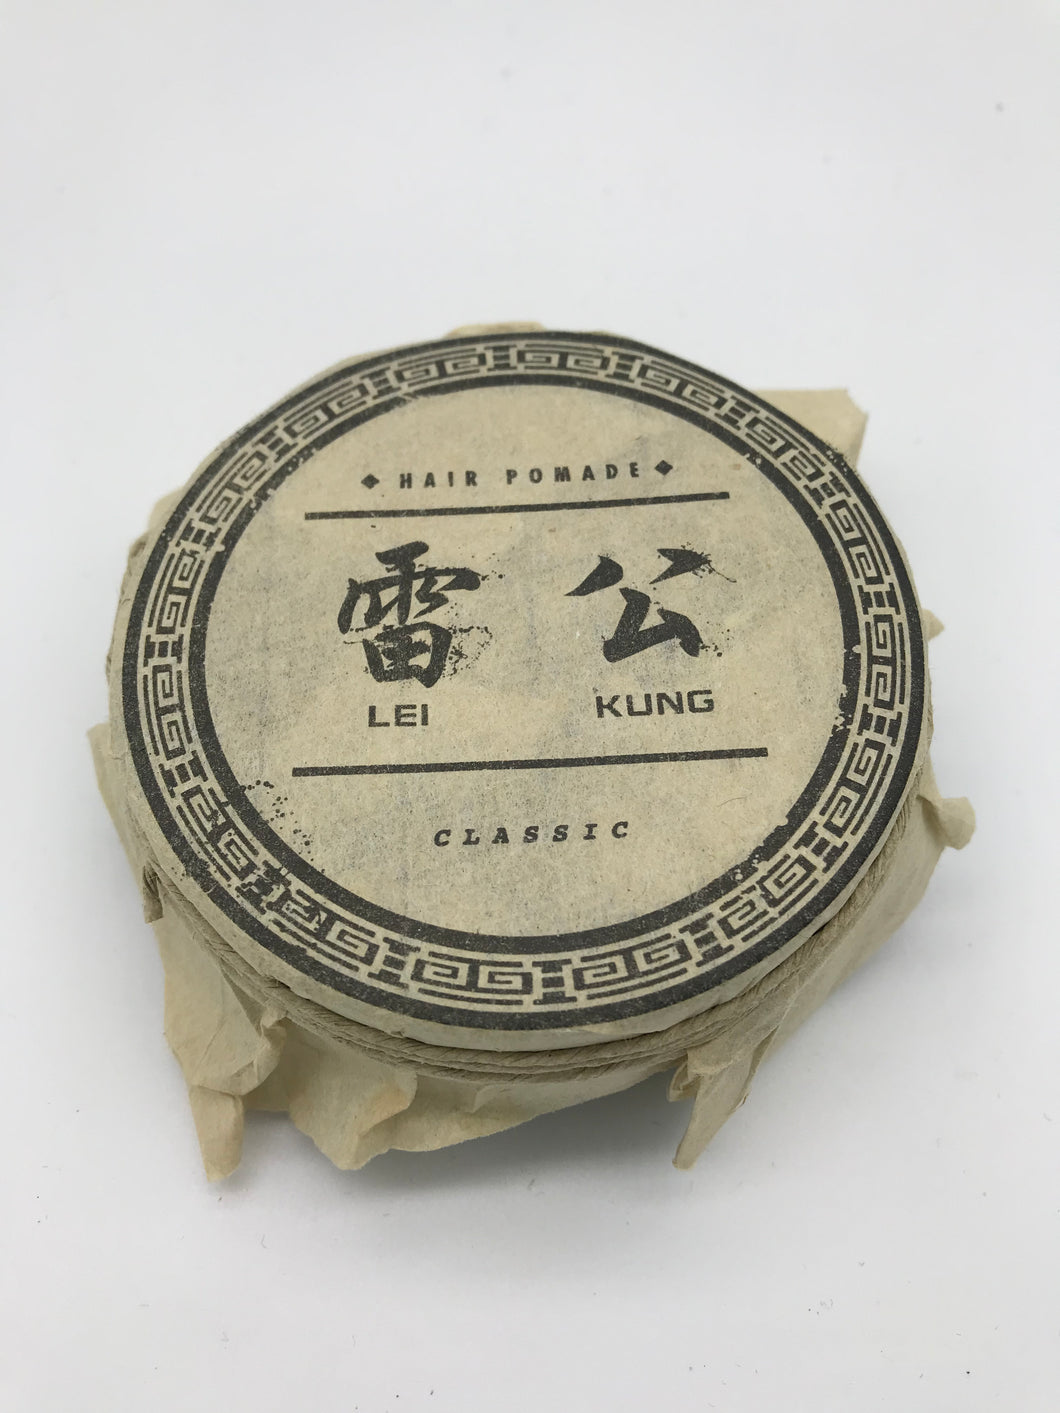 Lei Kung Waterbased Pomade 雷公髮油